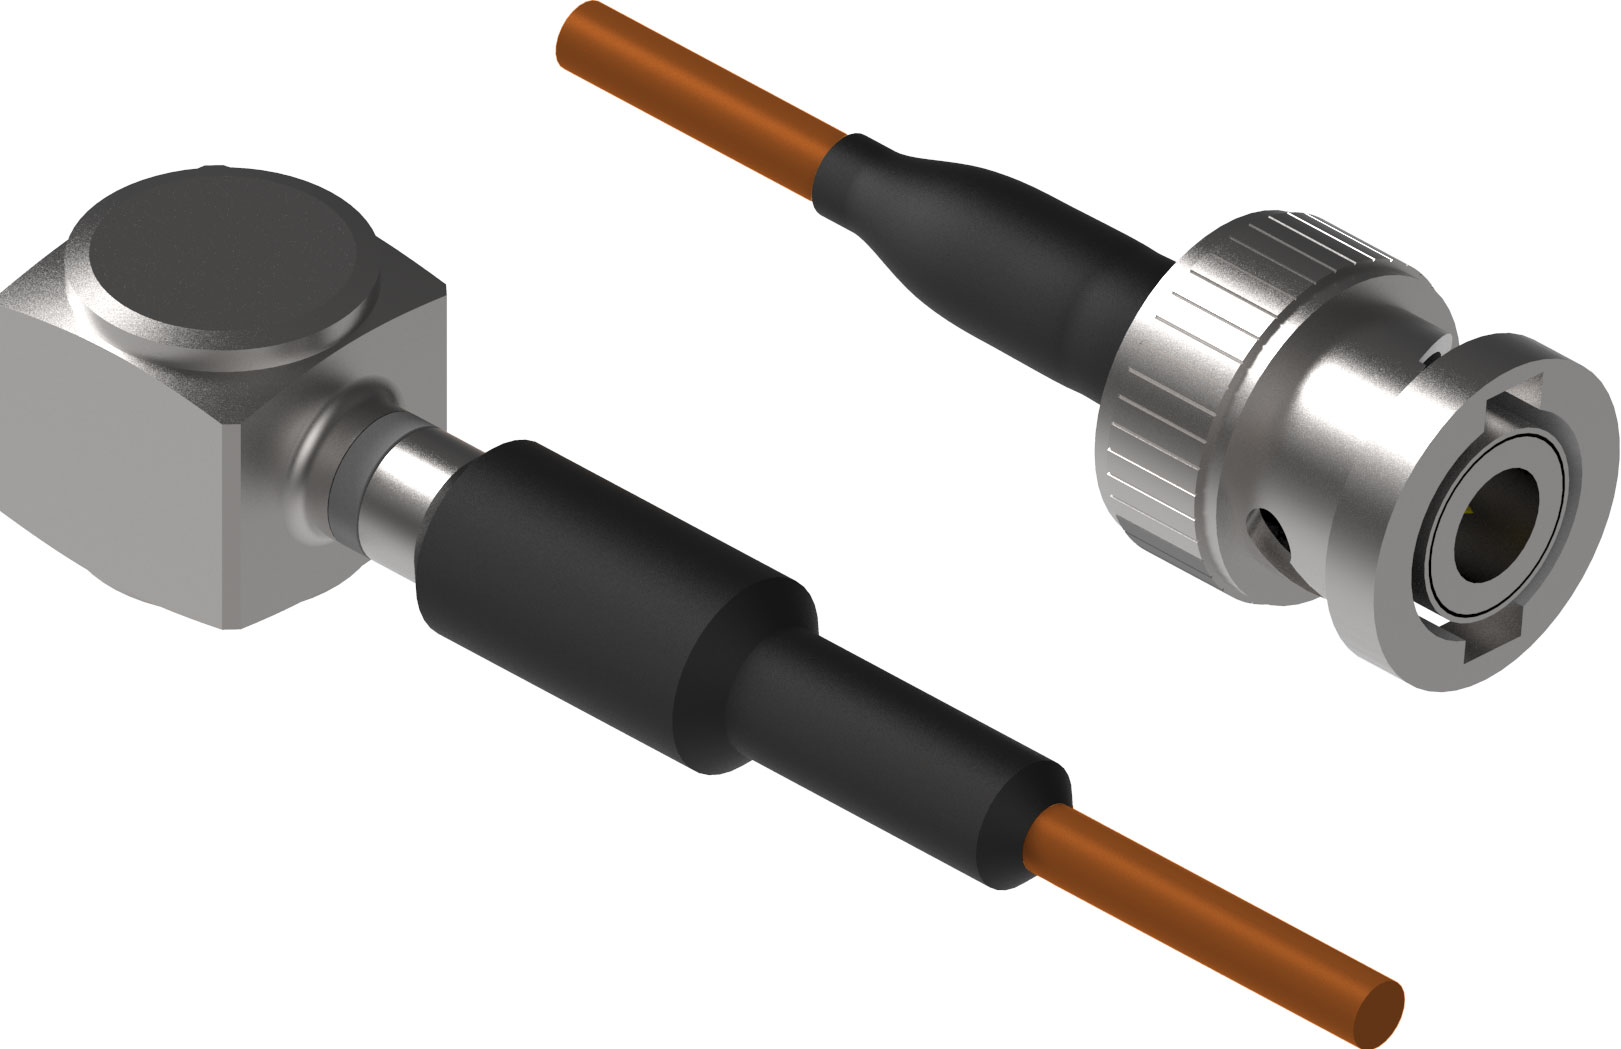 Accelerometer is suited for underwater vibration measurement.